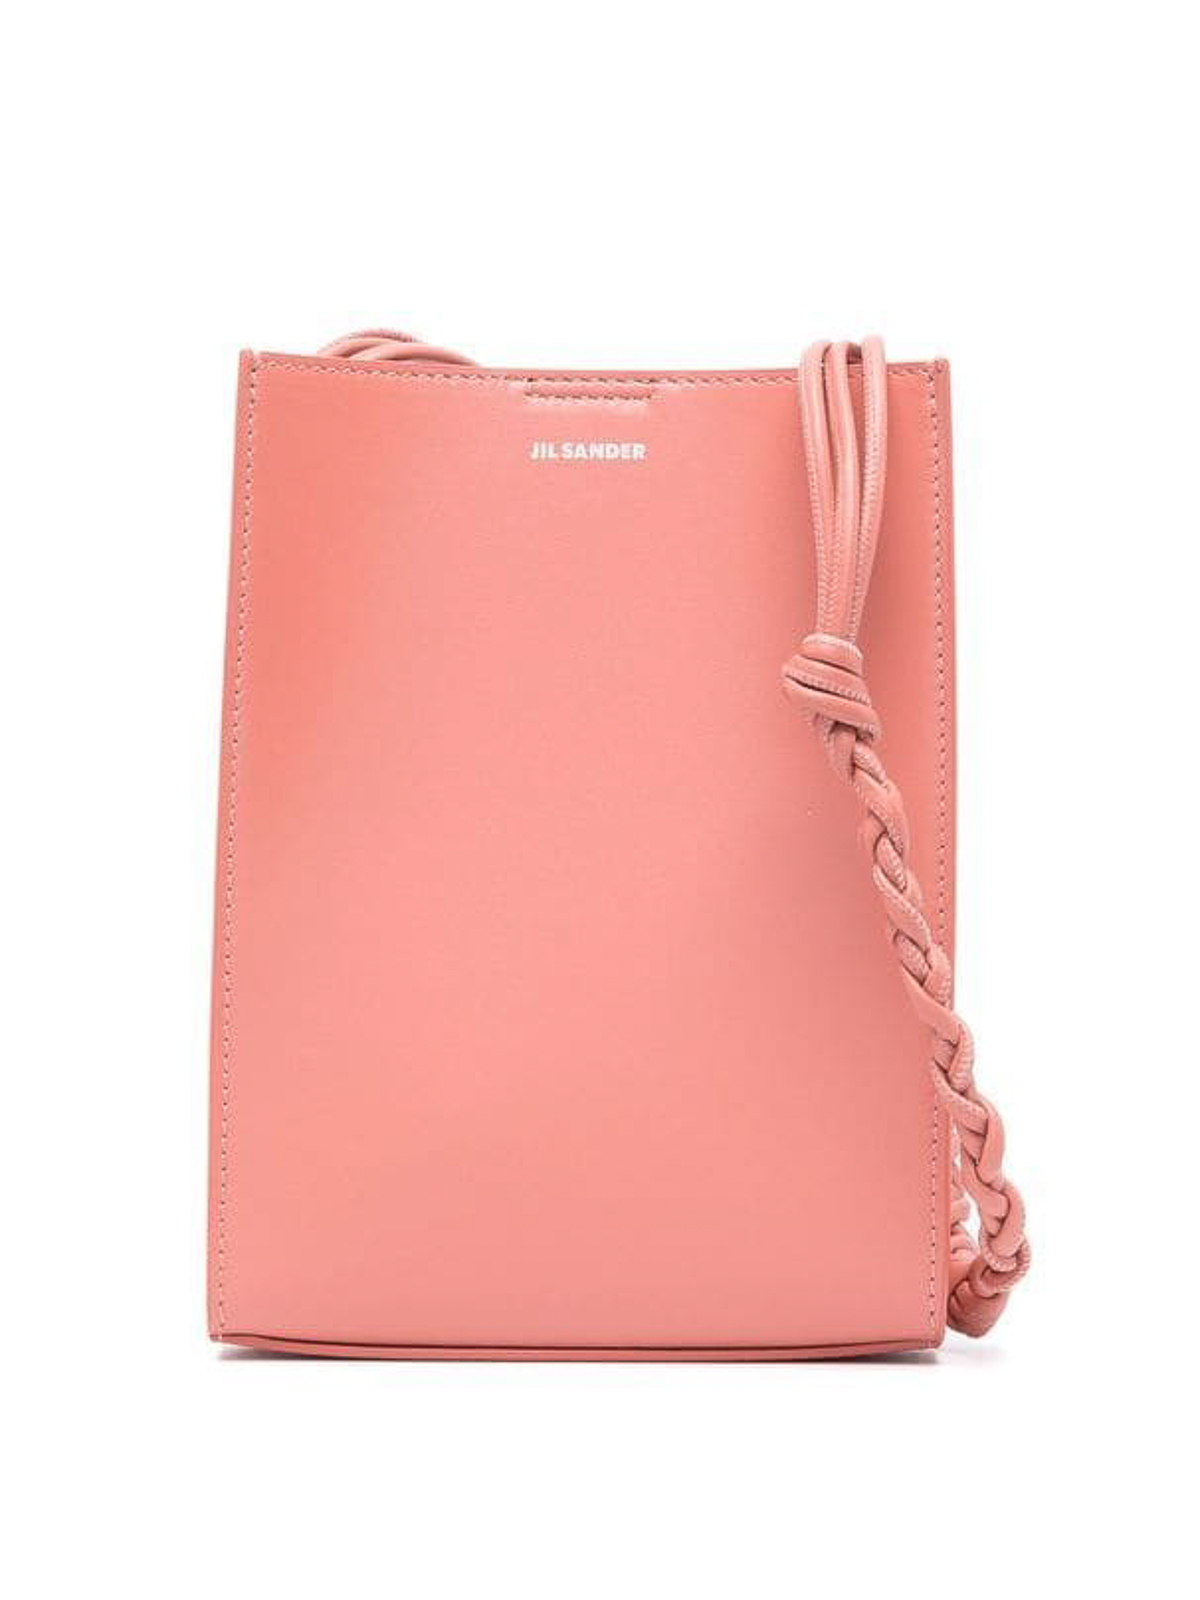 Jil Sander Tangle Small Leather Bag In Pink